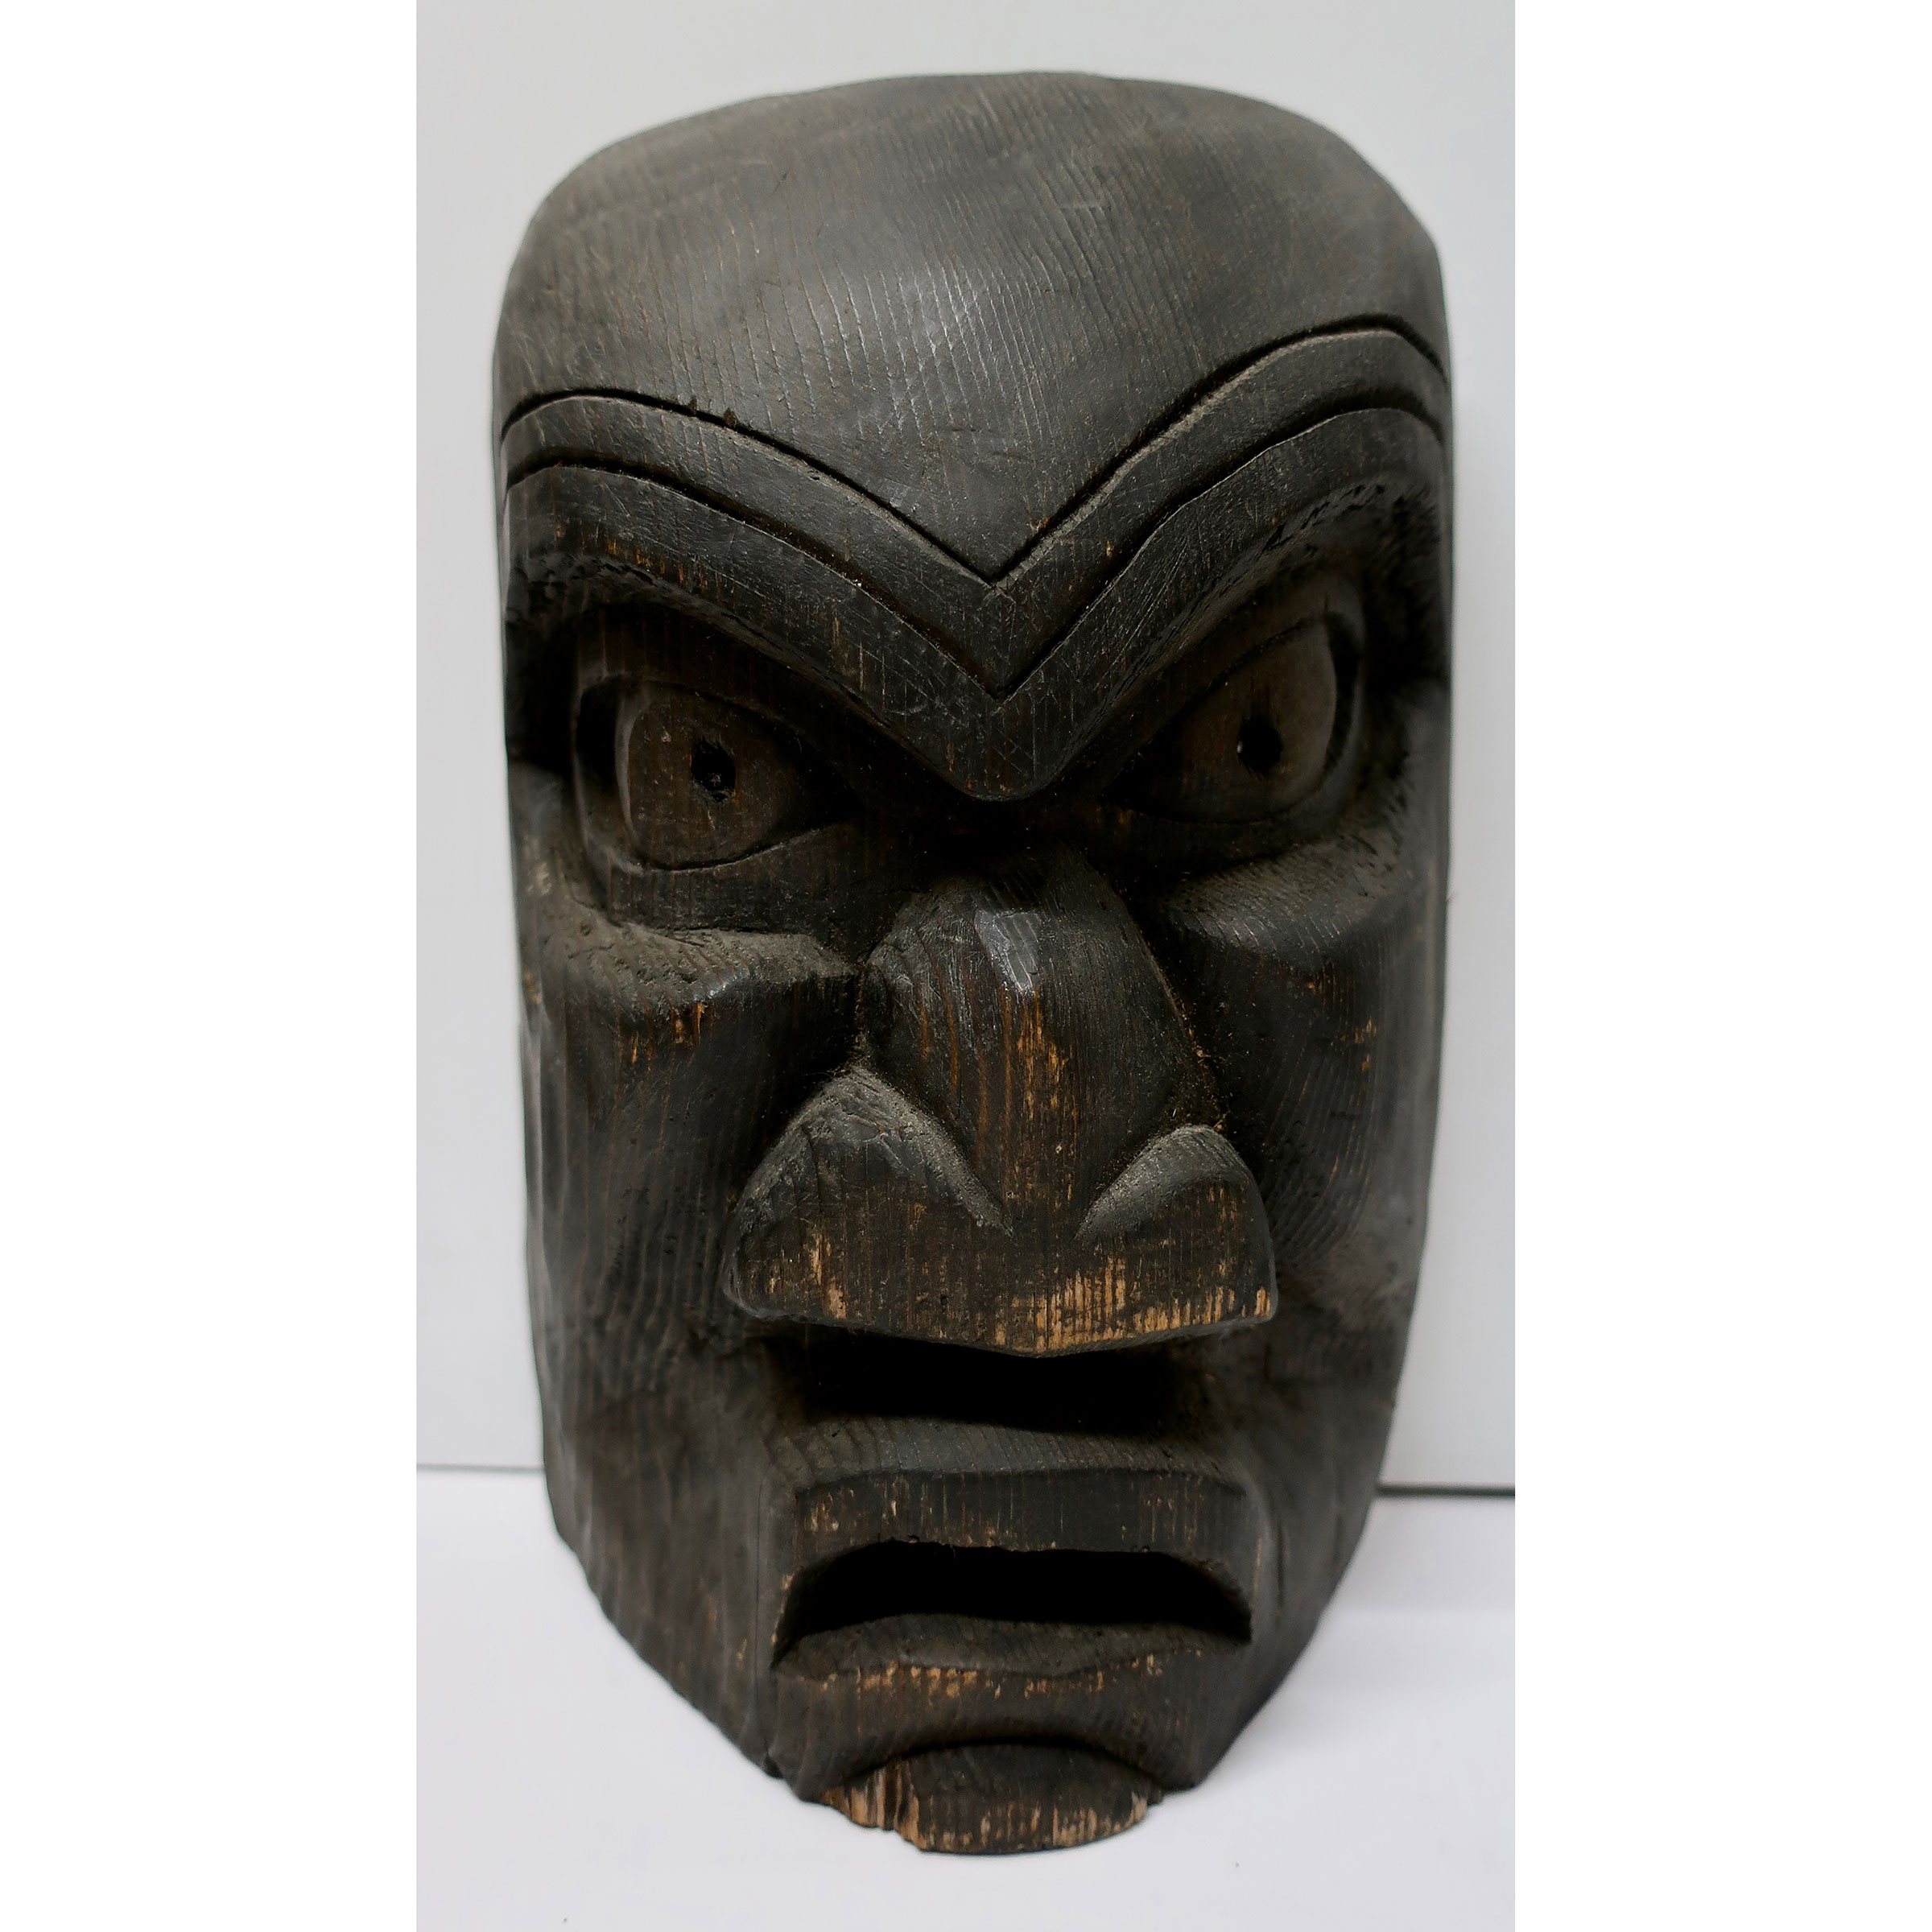 UNKNOWN (INDIGENOUS, 20TH CENTURY)  